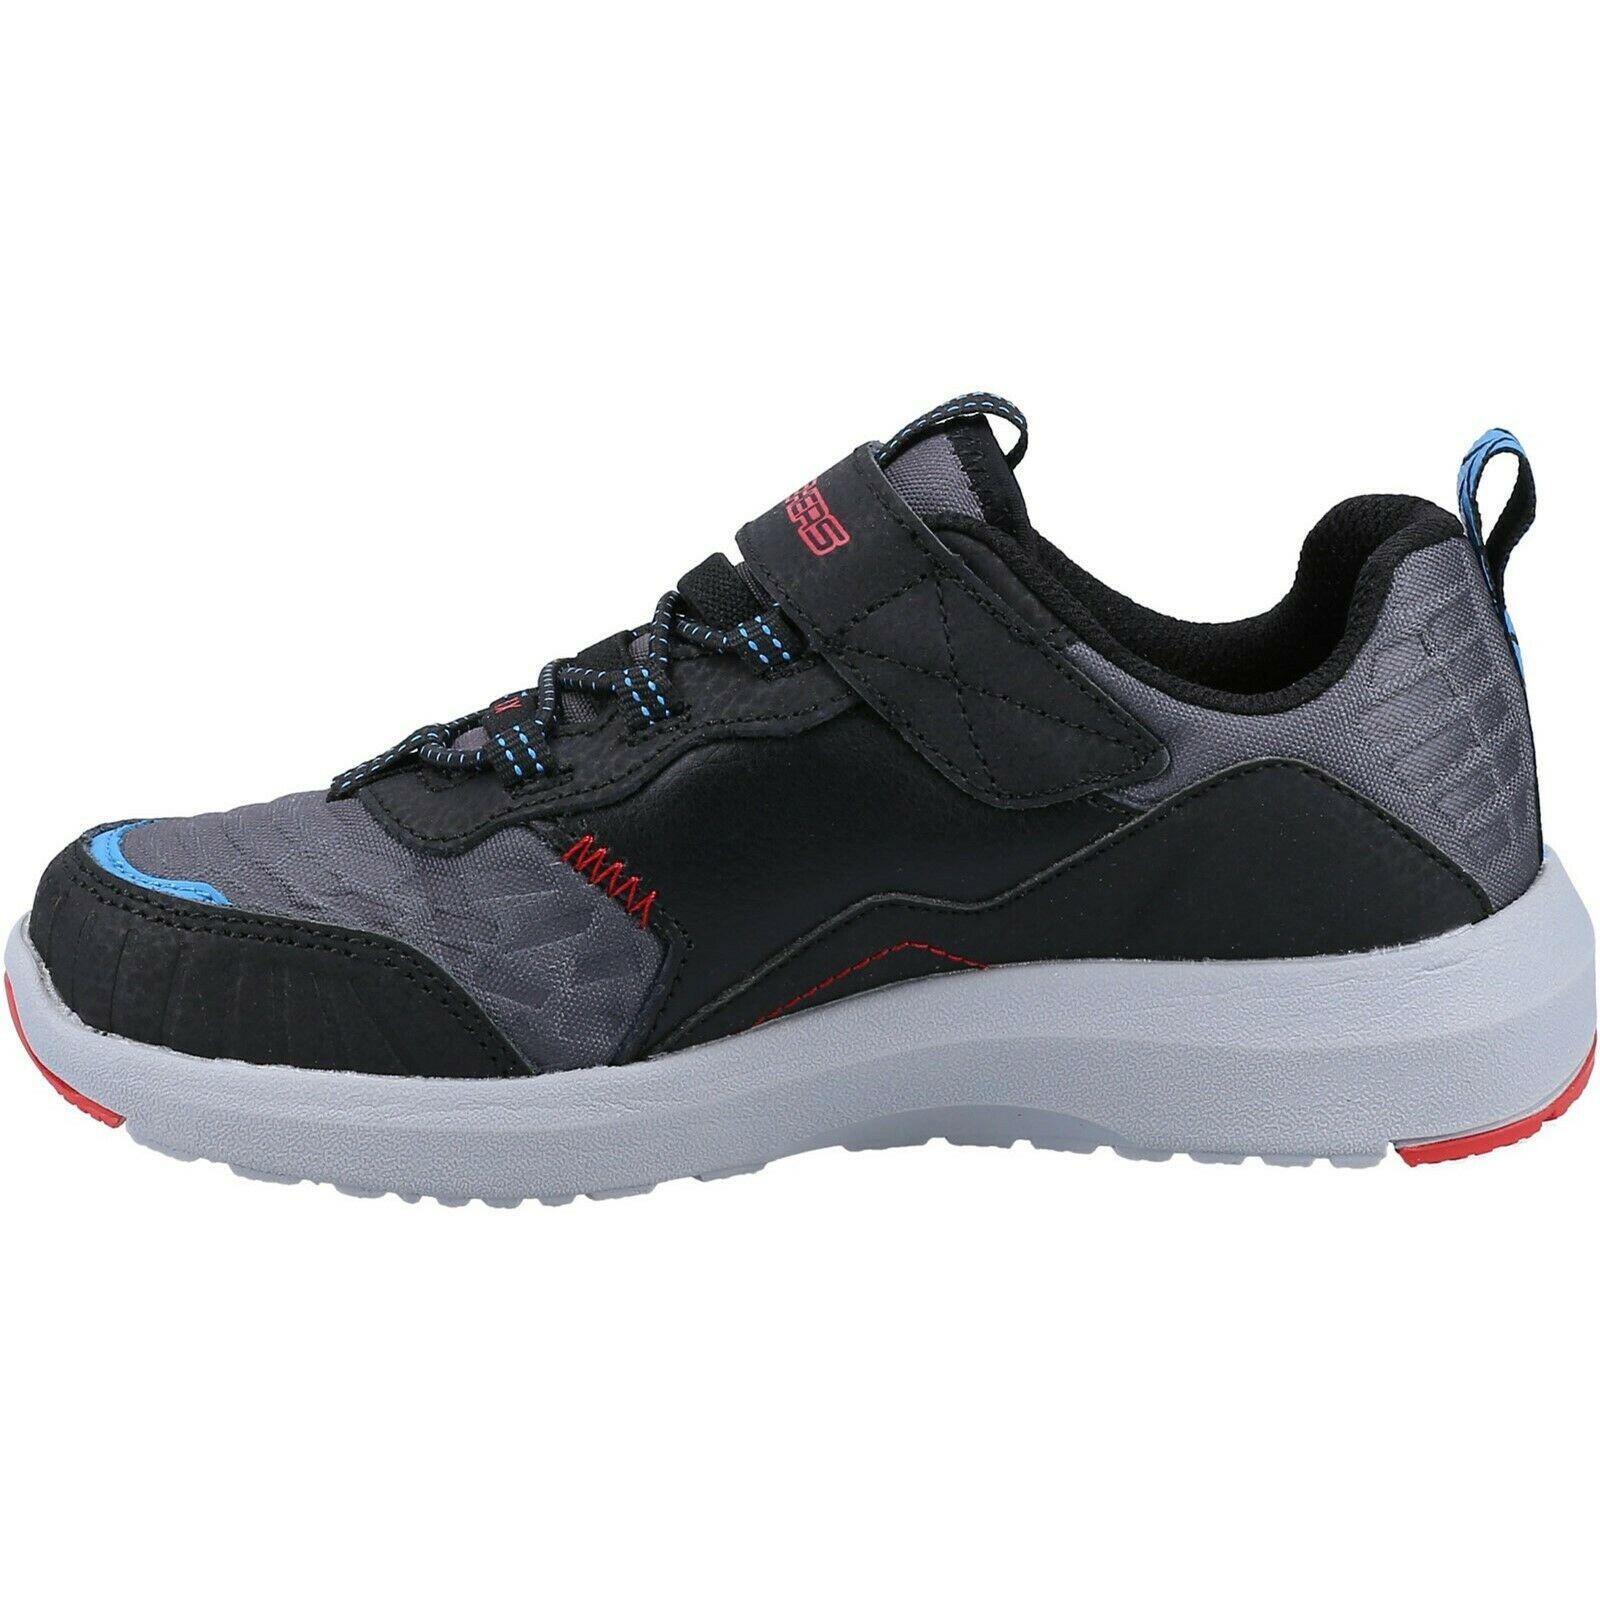 Boys Dynamic Tread Top Speed Leather Trainers (Black/Red) 4/5